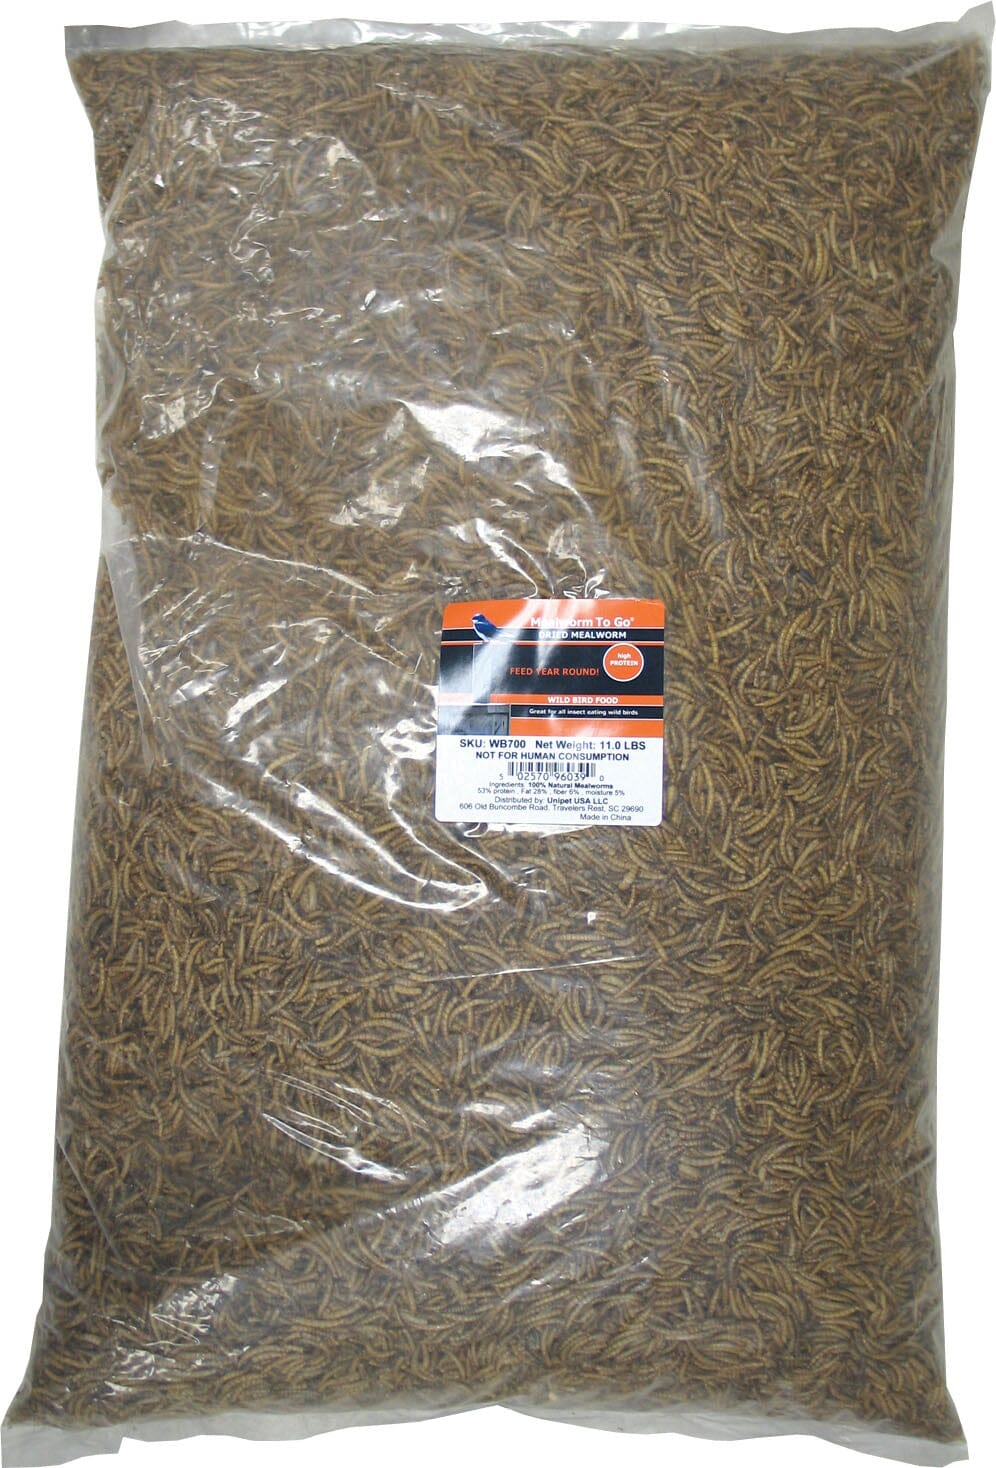 Mealworm To Go Dried Mealworms Value Wild Bird Food - 11.02 Lbs  